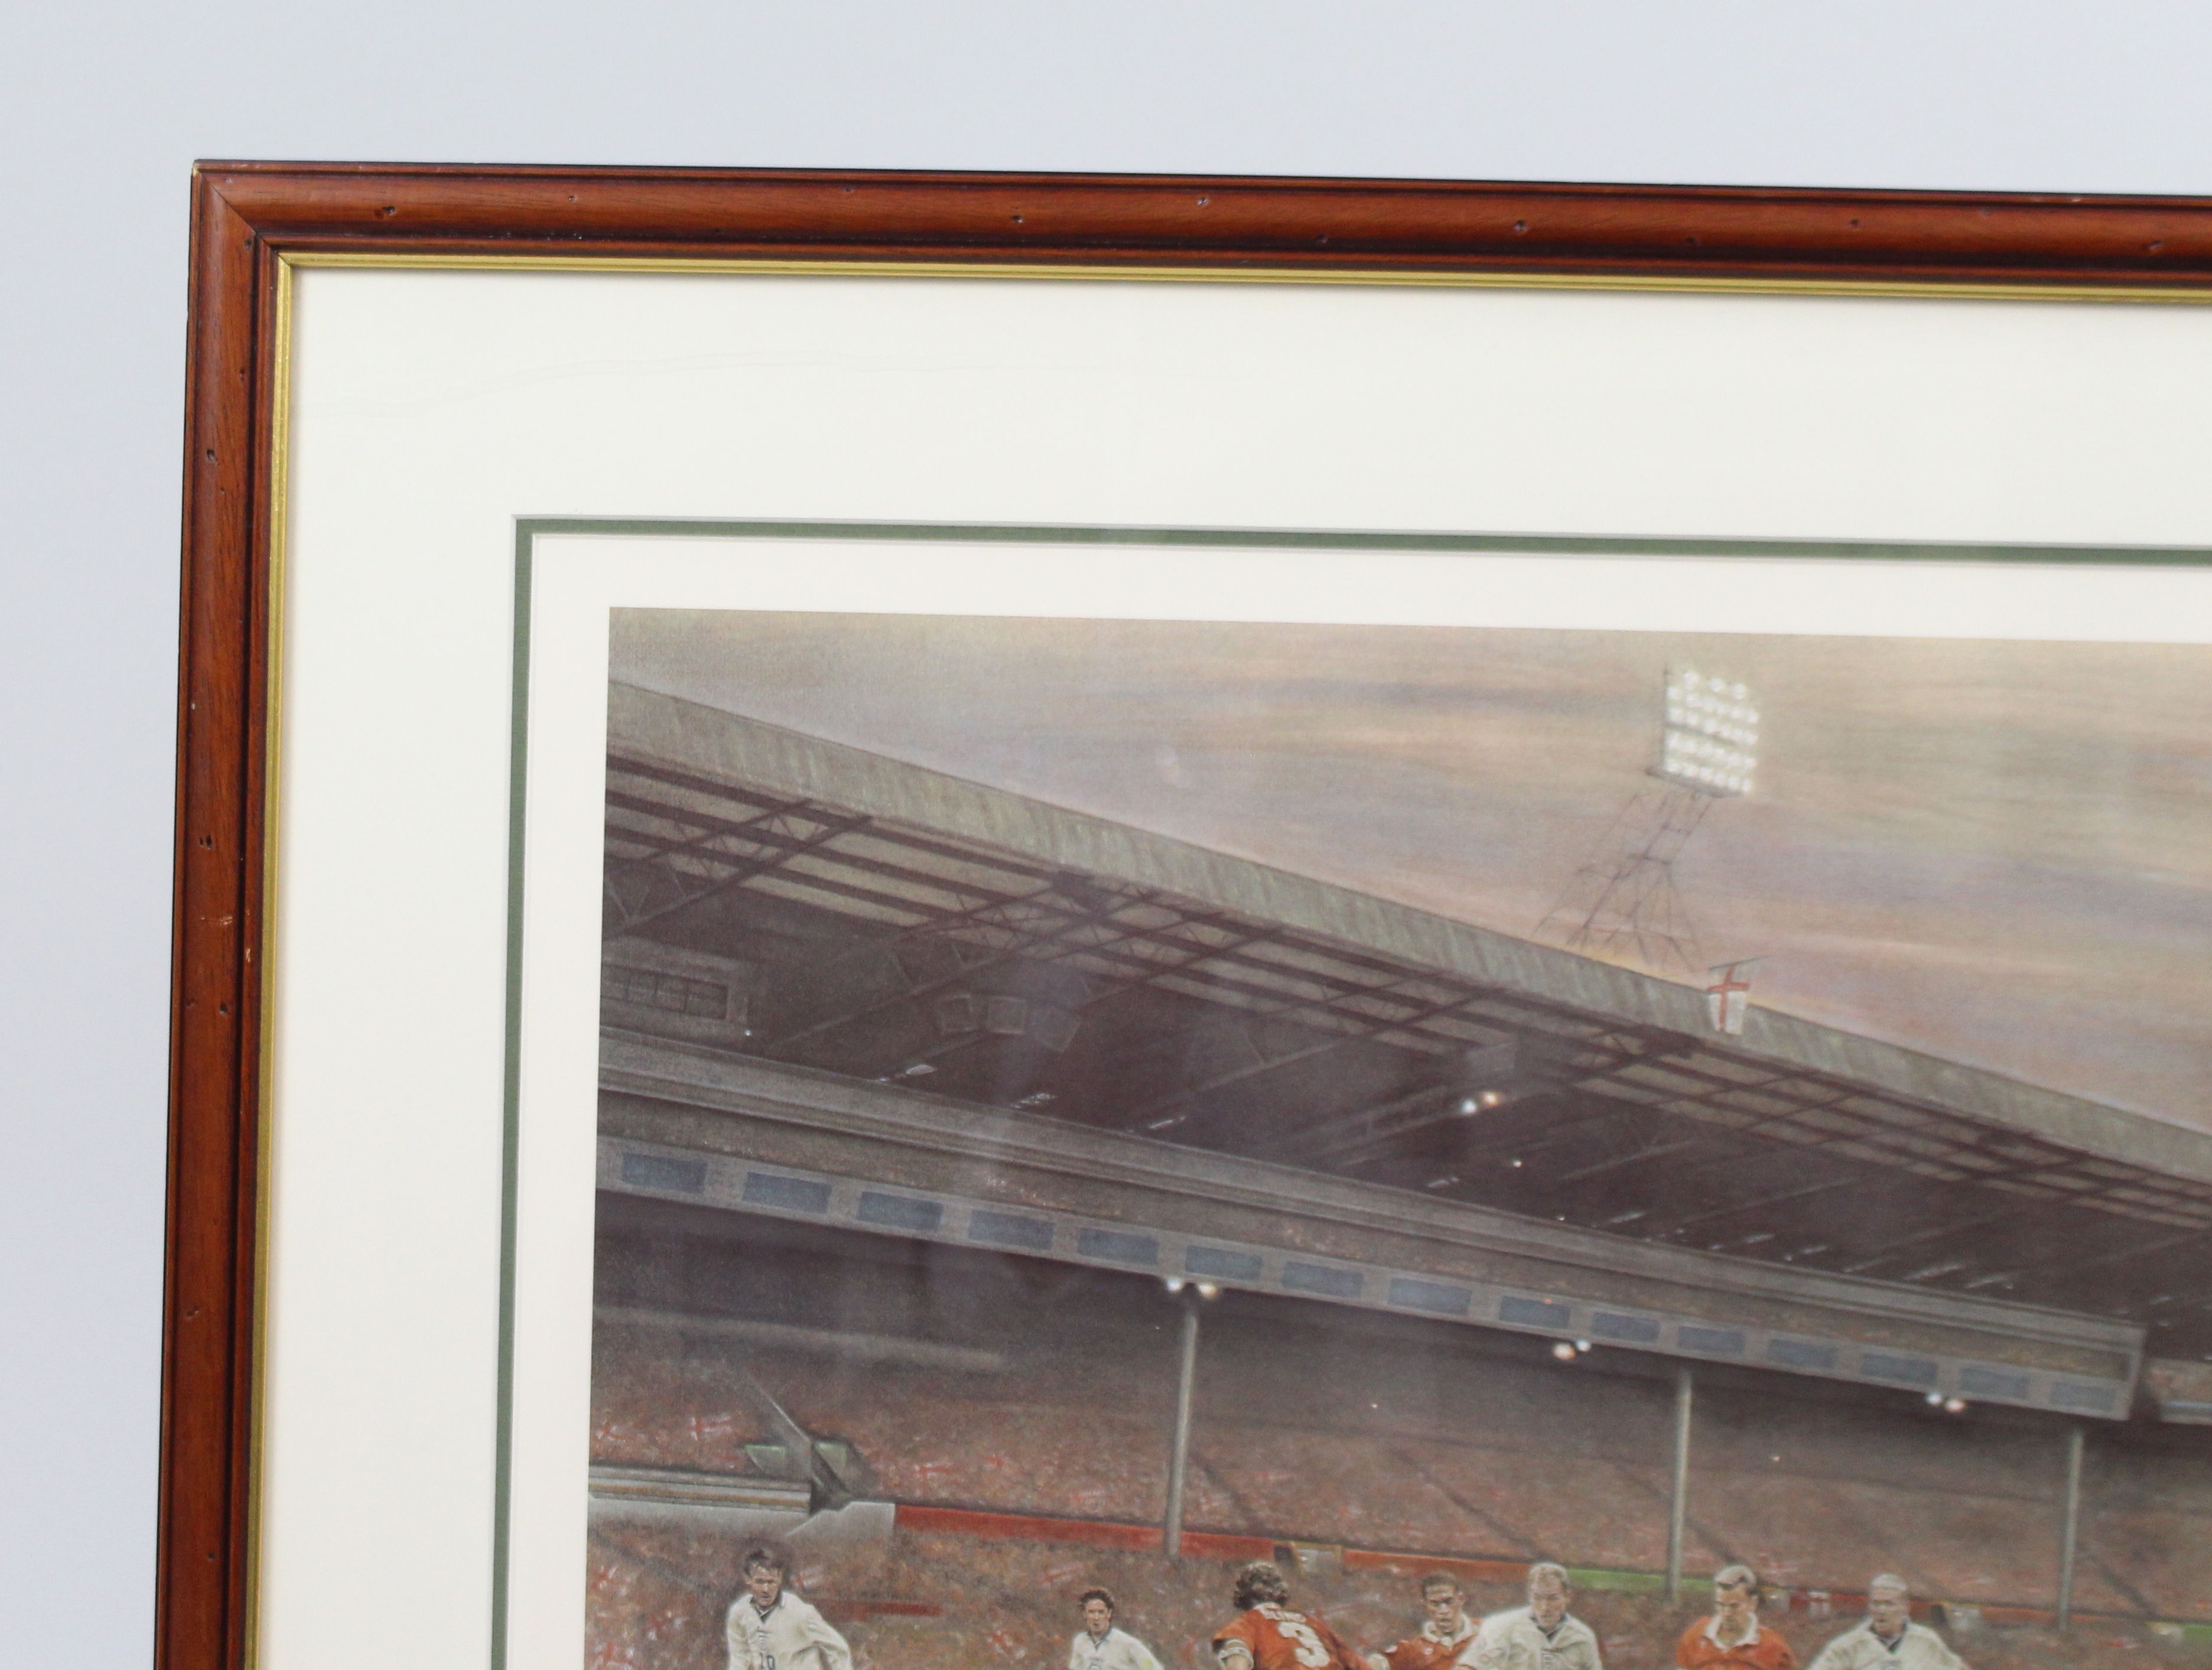 Signed Limited Edition Framed Football Print "Coming Home" - Image 2 of 5